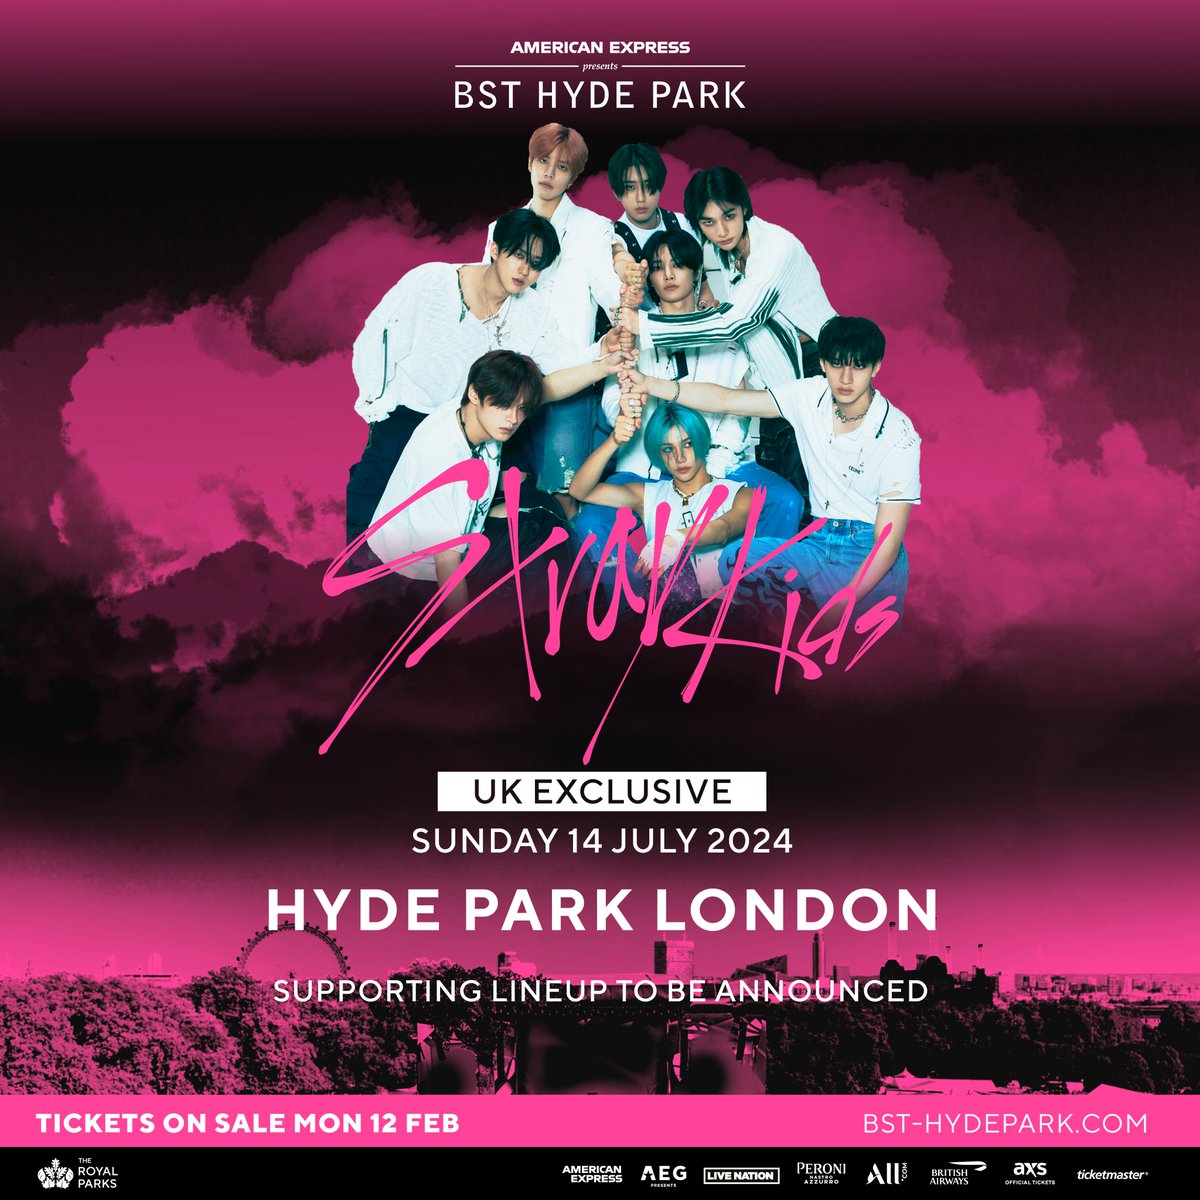 Calling all K-pop fans, we have exciting news! @Stray_Kids are coming to London for a UK exclusive performance at American Express presents BST Hyde Park on Sunday 14 July 2024 💓 🎟 @bsthydepark presale goes live at 10am GMT Friday 9 February. Only those on the BST Hyde Park…